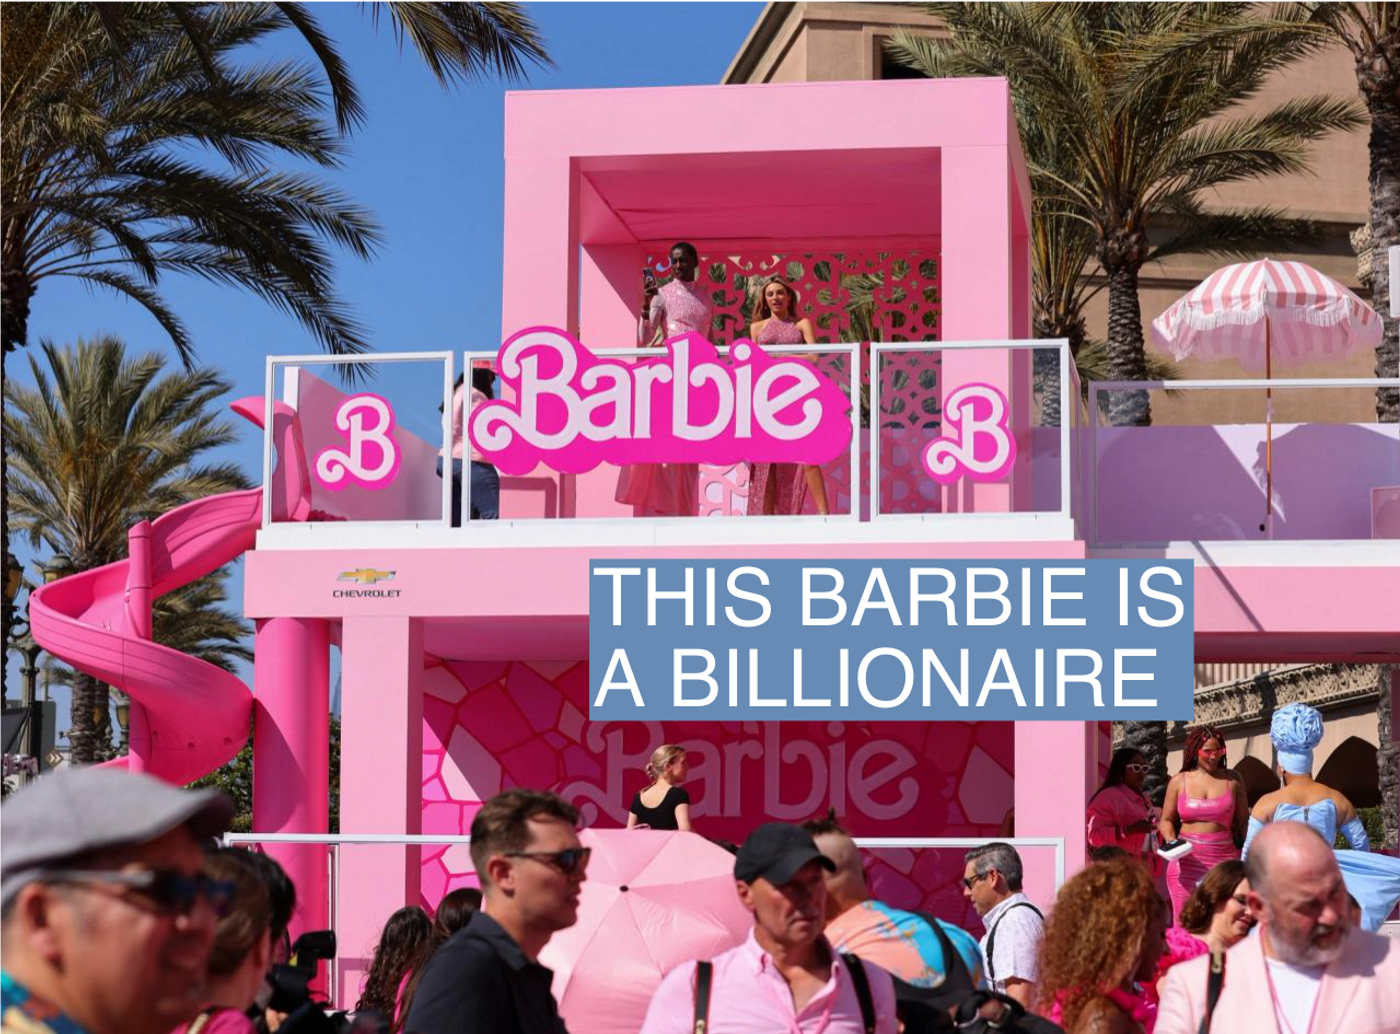 A general view of the world premiere of the film "Barbie" in Los Angeles, California, U.S., July 9, 2023. REUTERS/Mike Blake